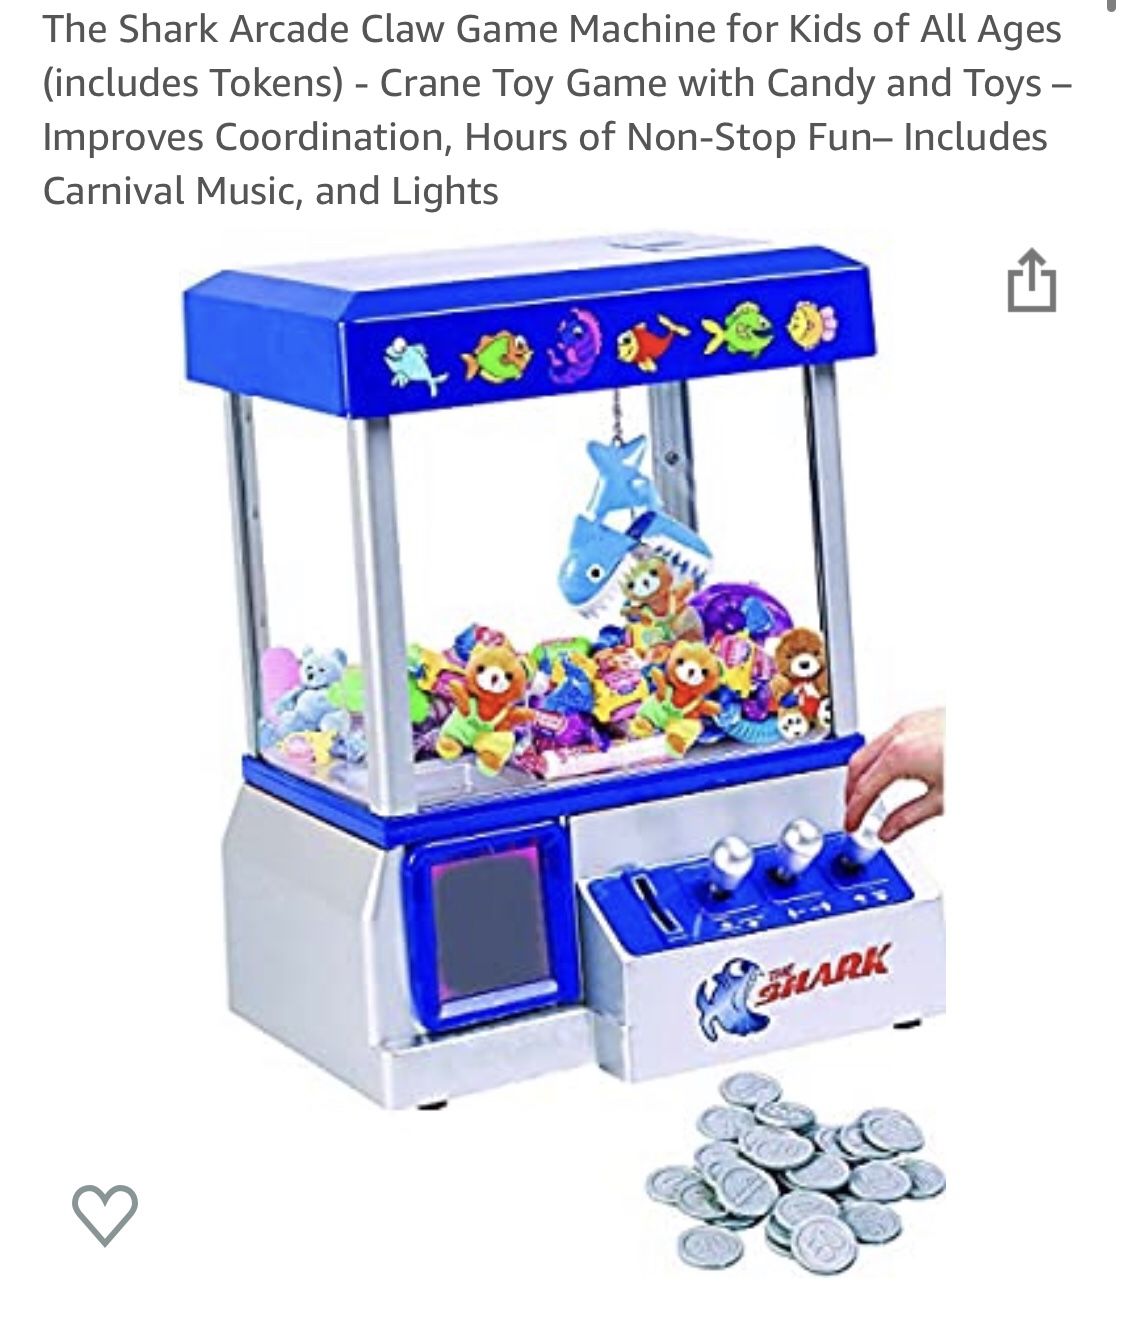 The Shark Arcade Claw Game Machine for Kids of All Ages (includes Tokens) - Crane Toy Game with Candy and Toys – Improves Coordination, Hours of Non-